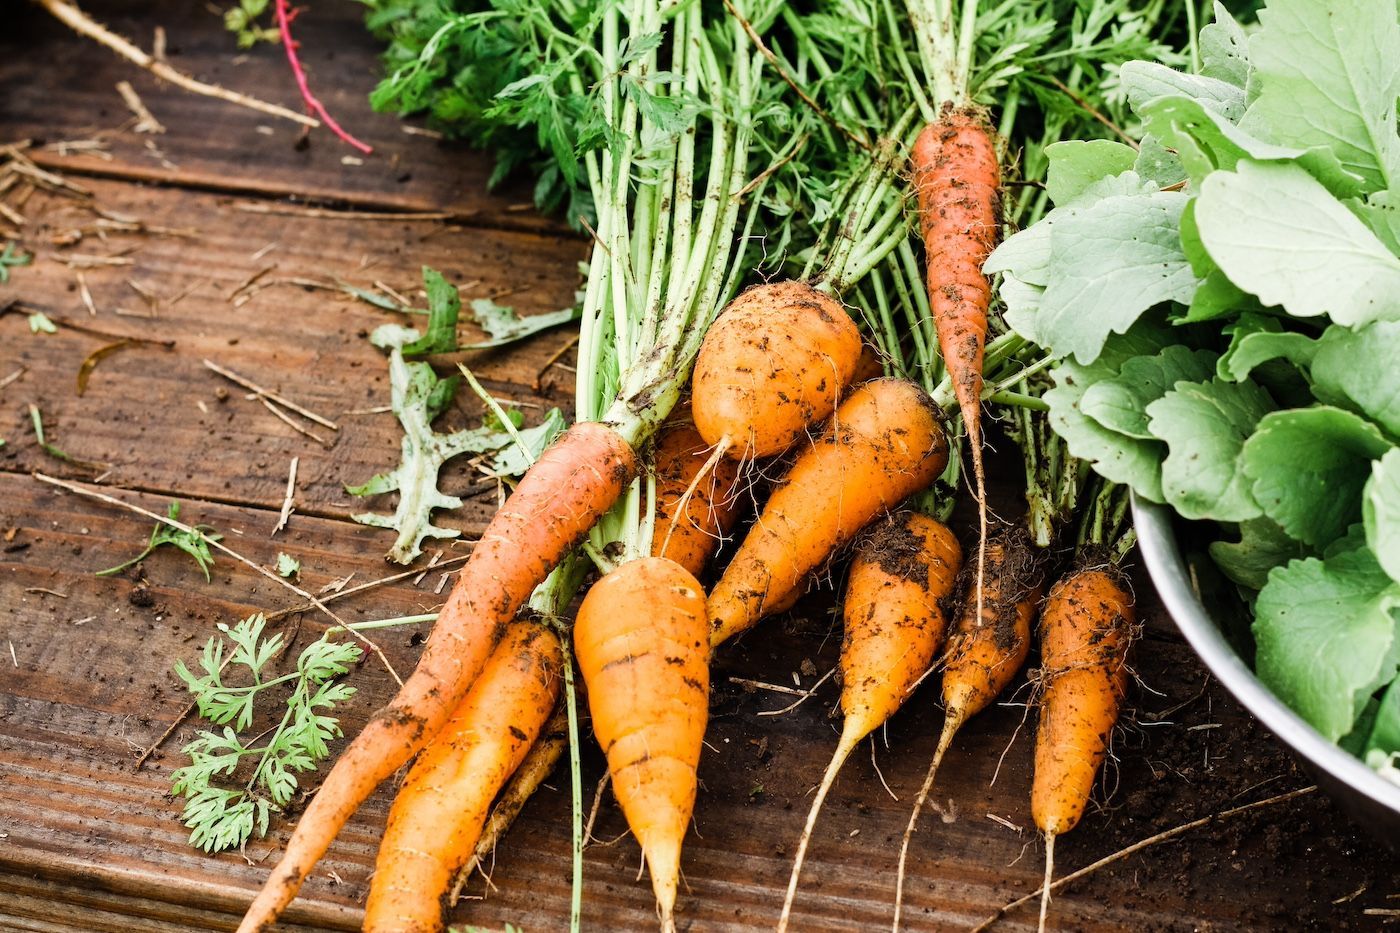 Carrots Are a Great Source of Vitamin A. Chews Your Health Is Sharing the Benefits of Vitamin A.